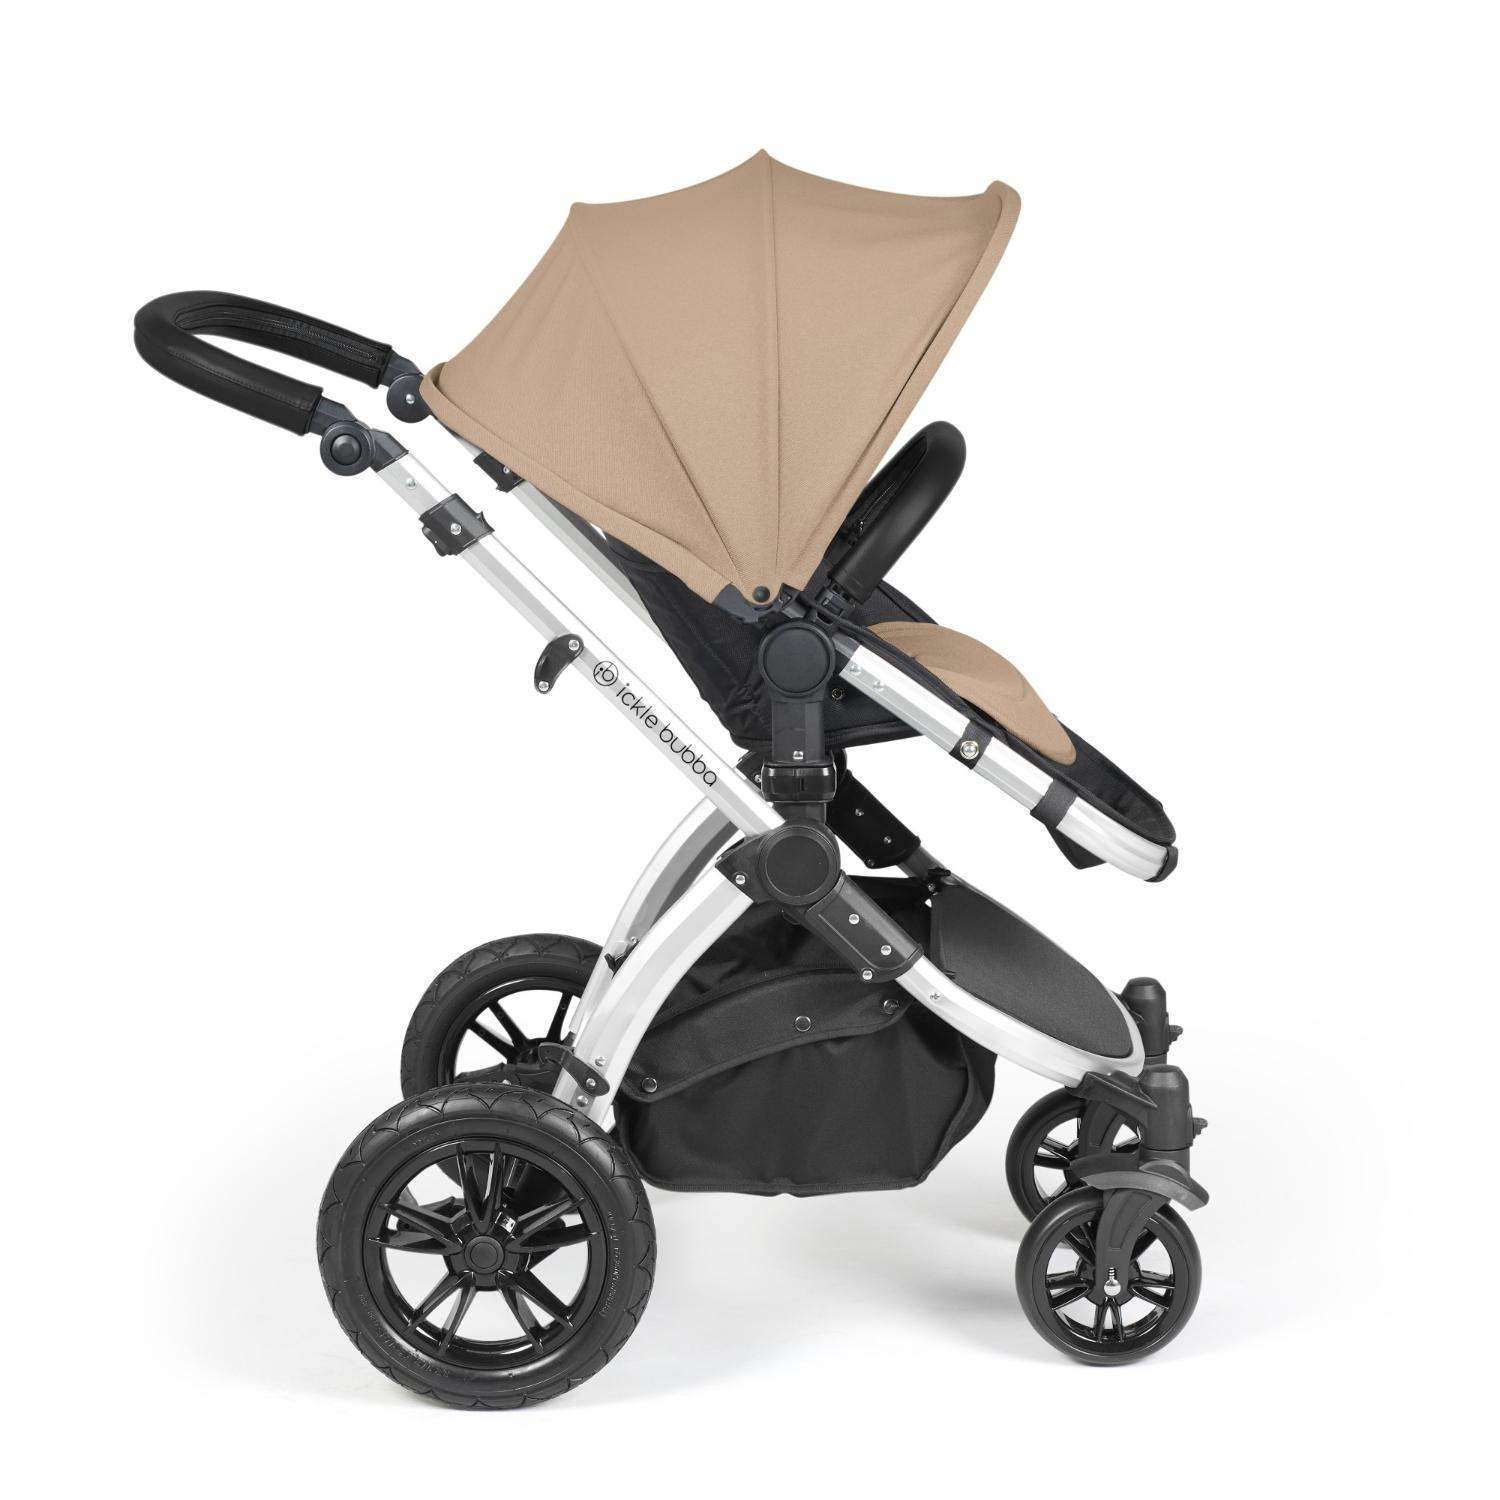 Side view of Ickle Bubba Stomp Luxe Pushchair with seat unit attached in Desert beige colour with silver chassis